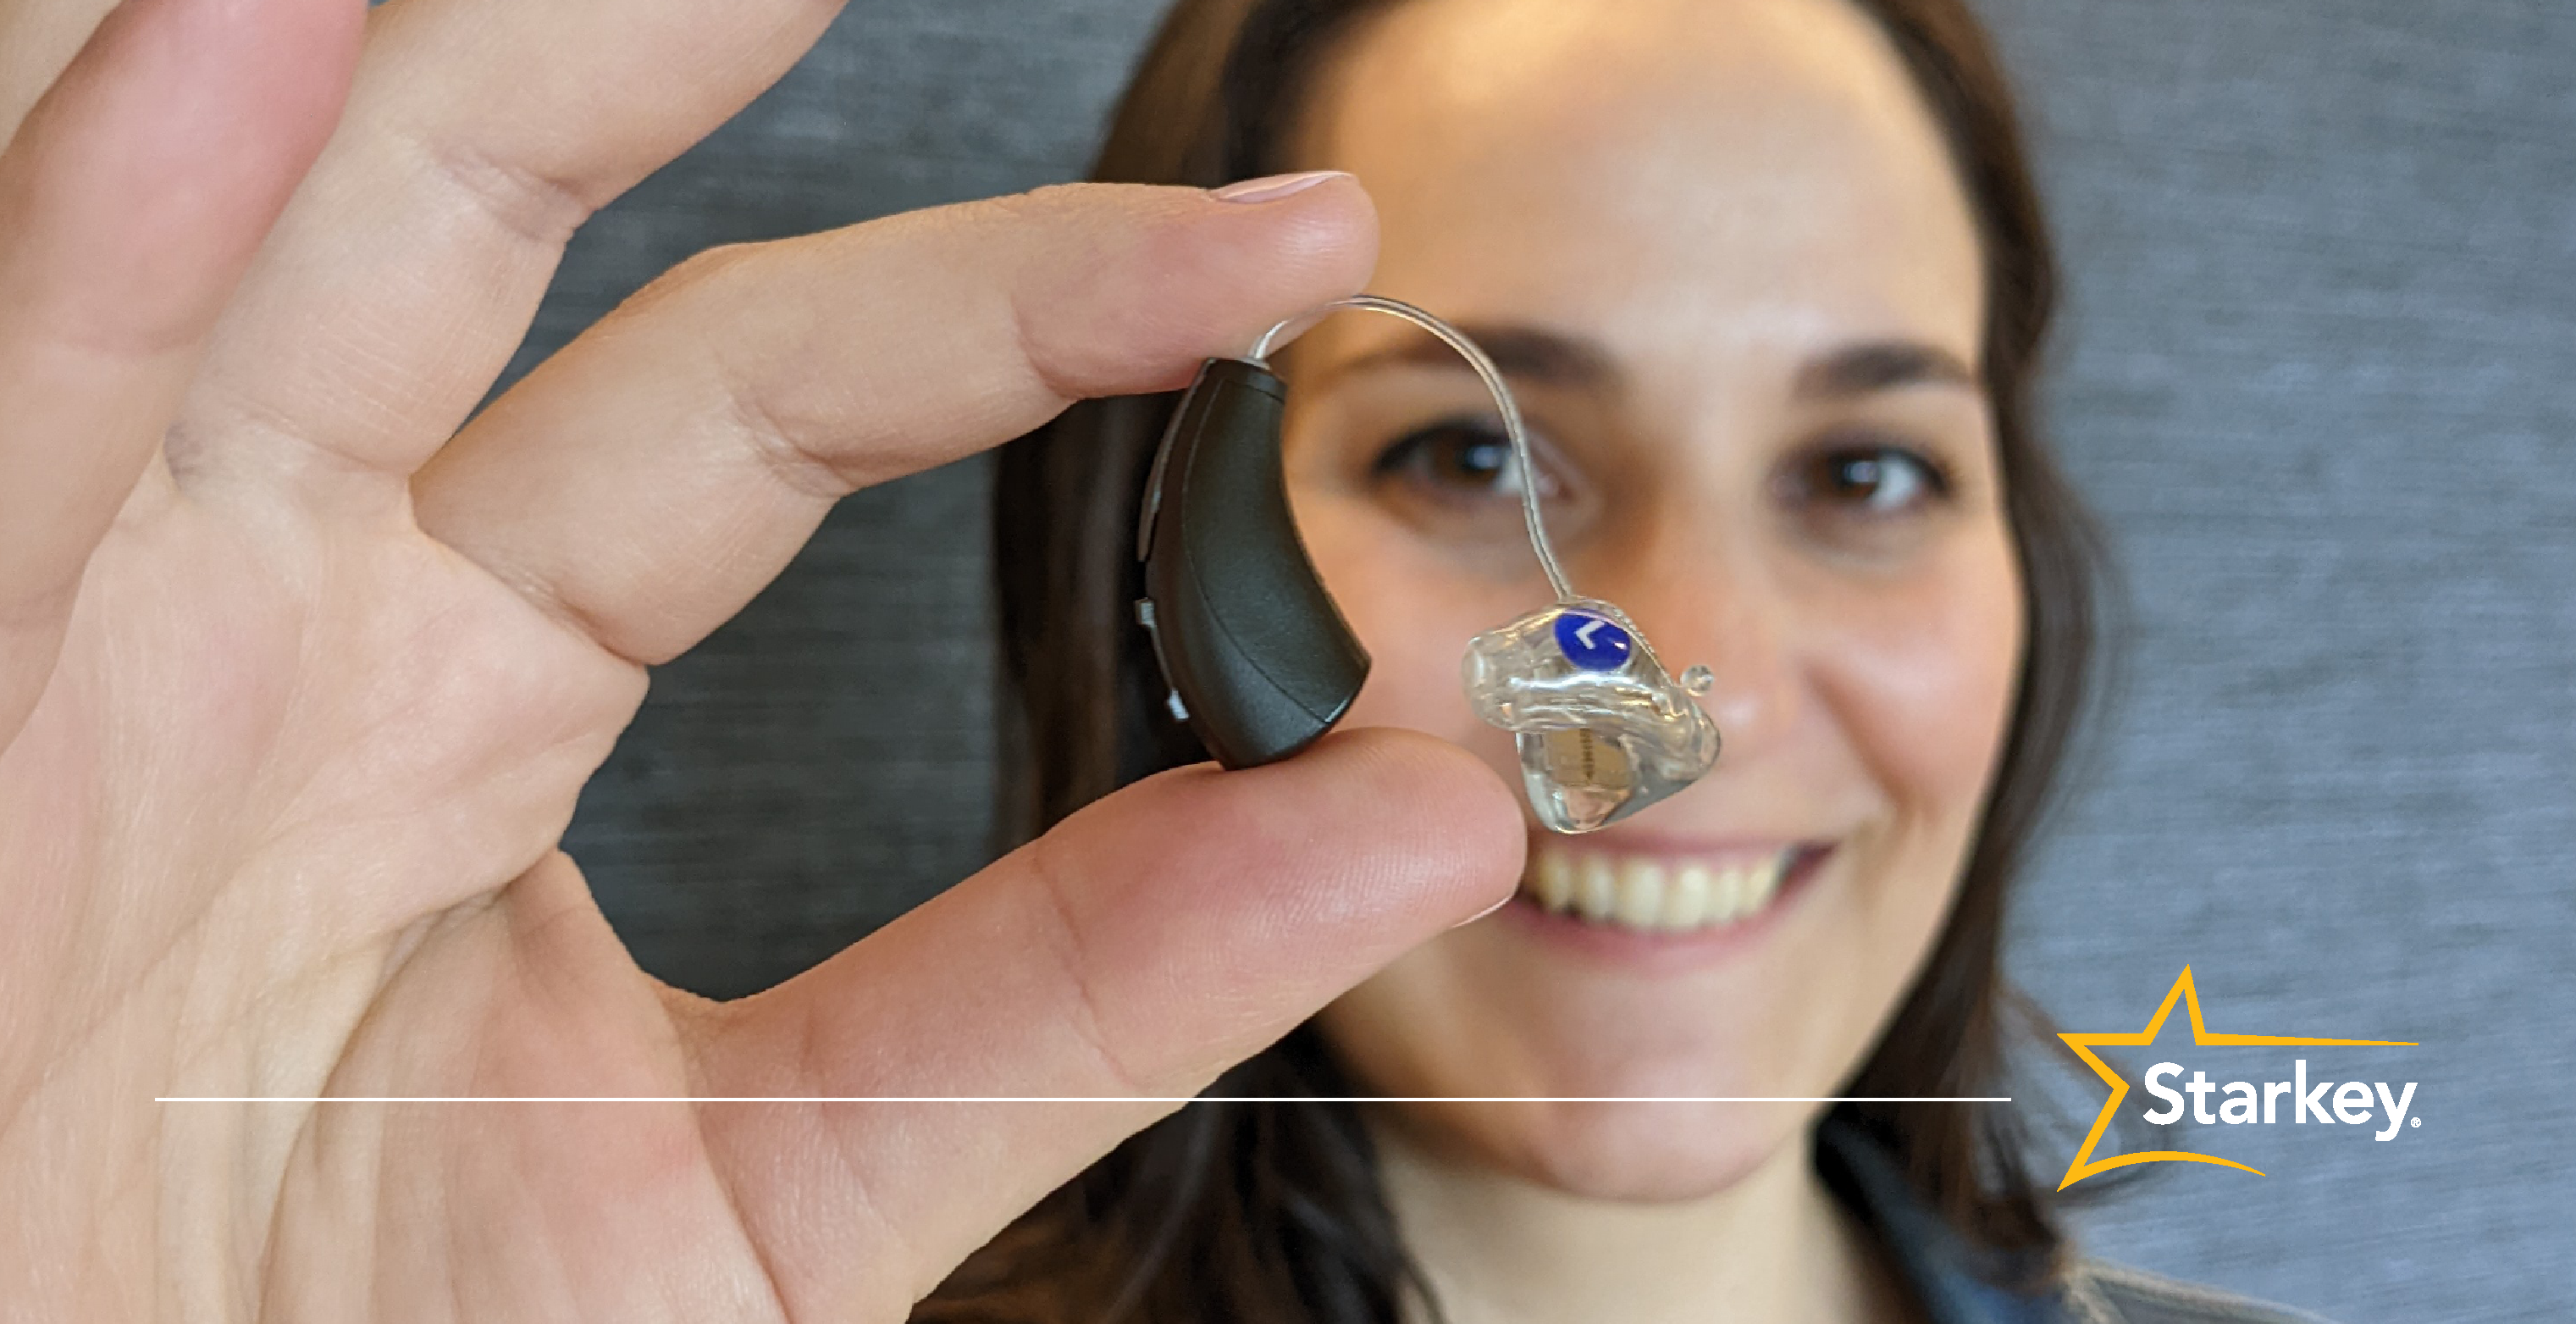 April Corner holds an espresso receiver-in-canal hearing aid in front of her right eye